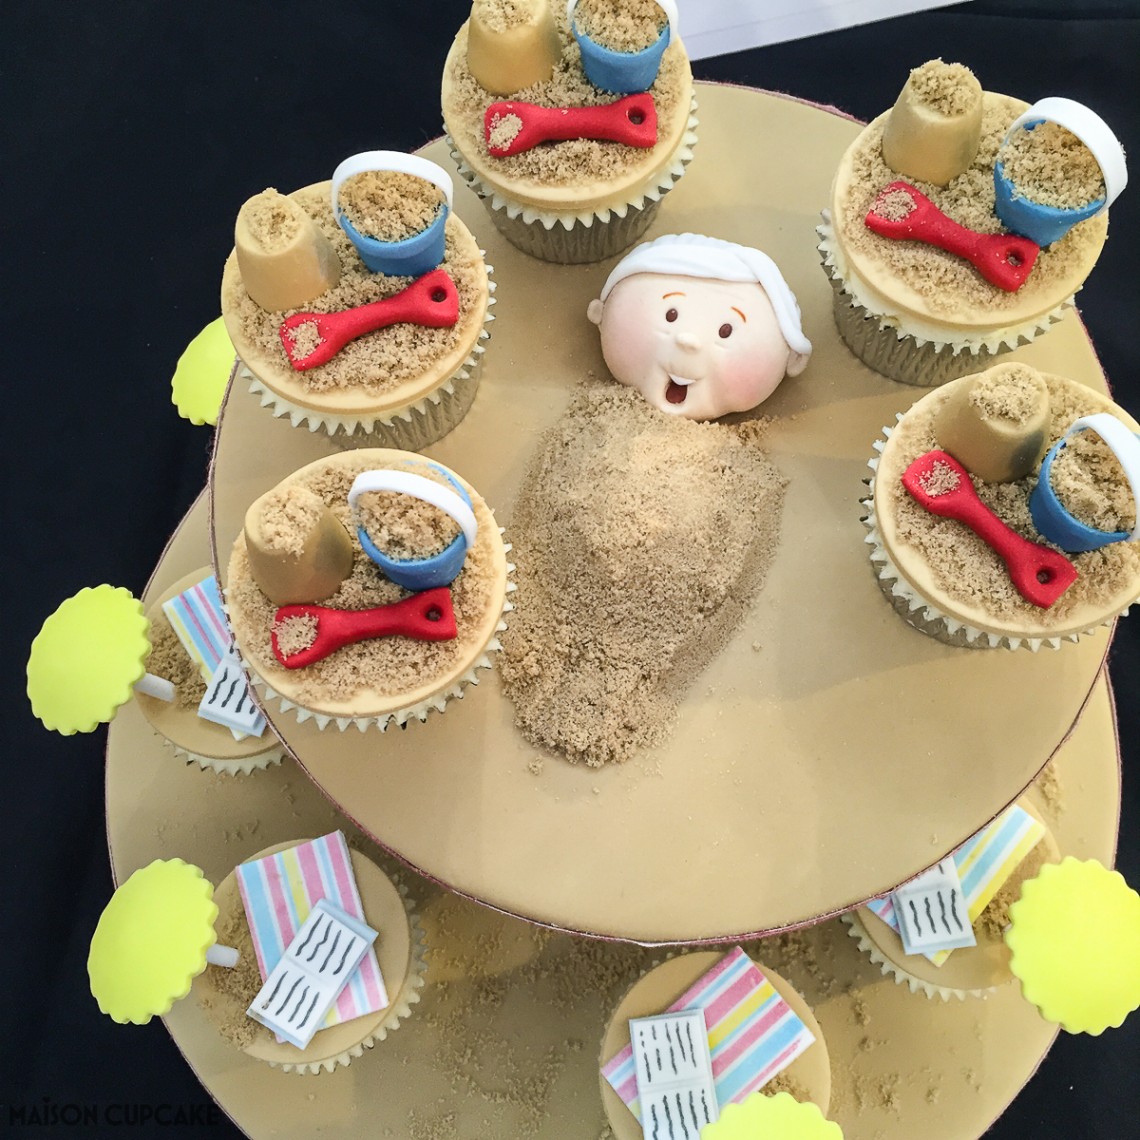 Sandcastle Cupcakes by Kirsty Watson